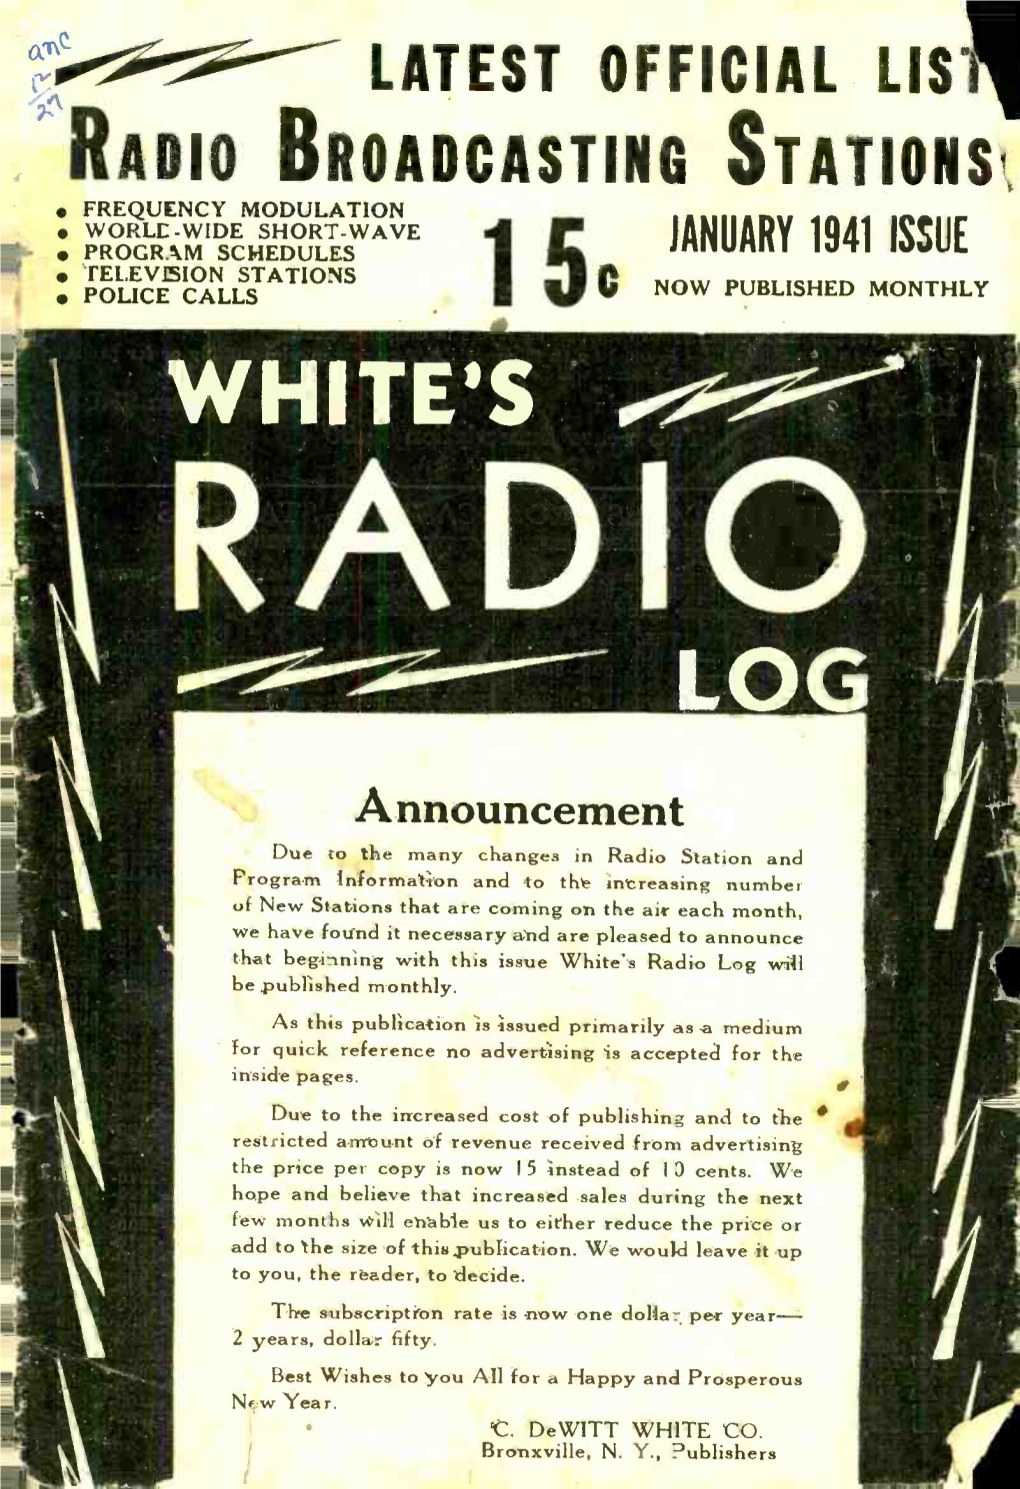 White's Radio Log Will Be Published Monthly